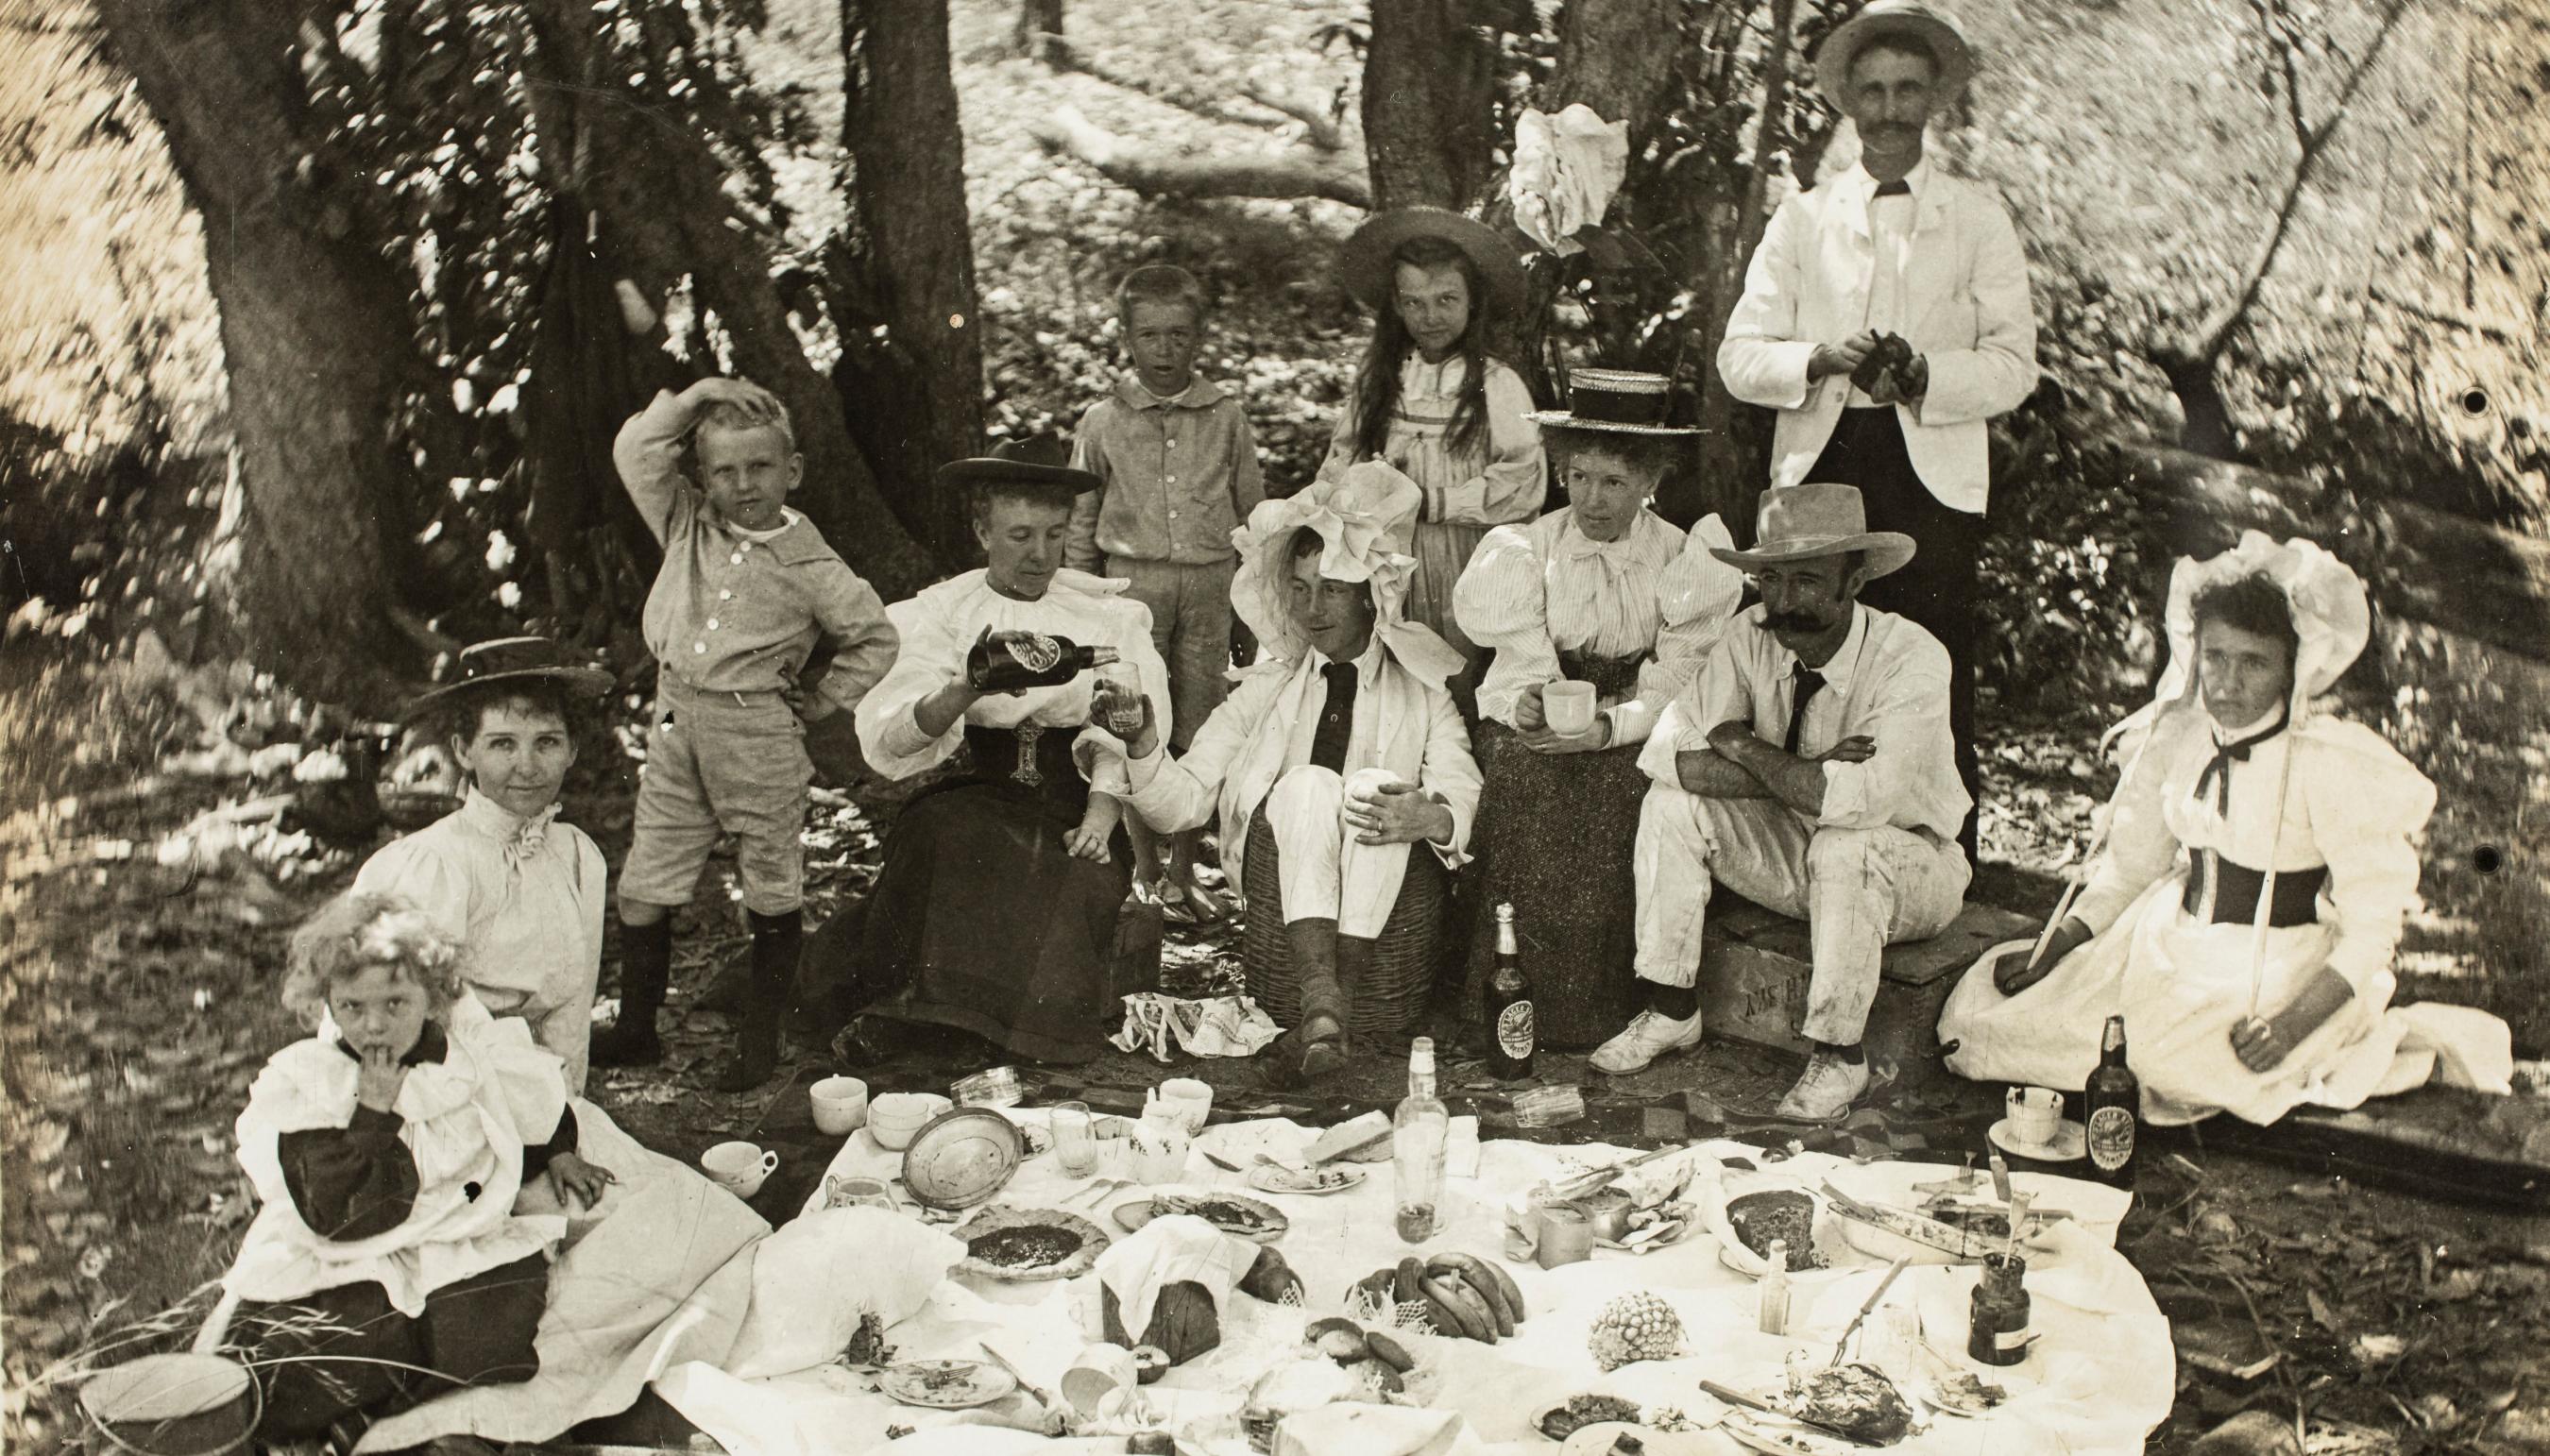 Black and white photograph of people sitting outside around a picnic blanket.